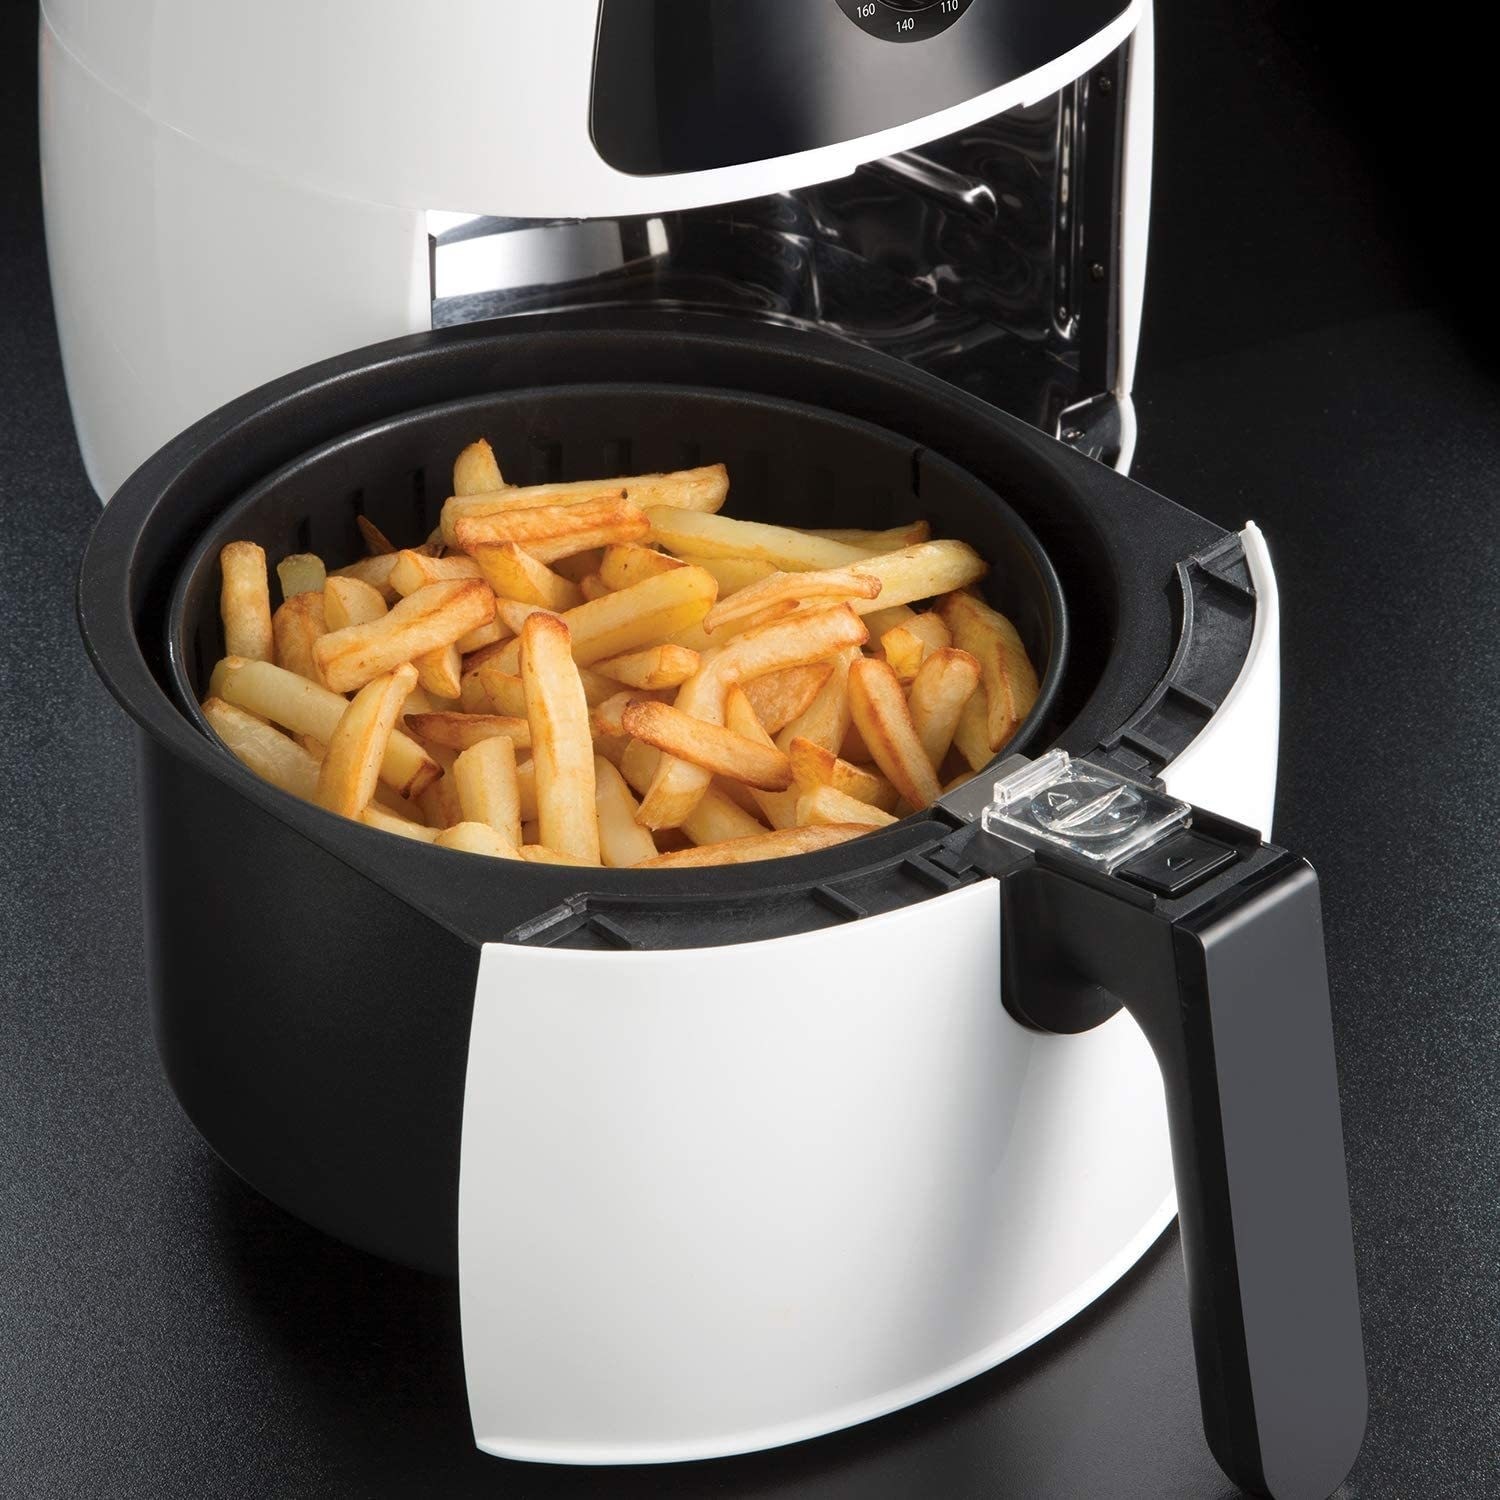 FRYER AIR DUAL - 10L oil-free fryer with separator - Create